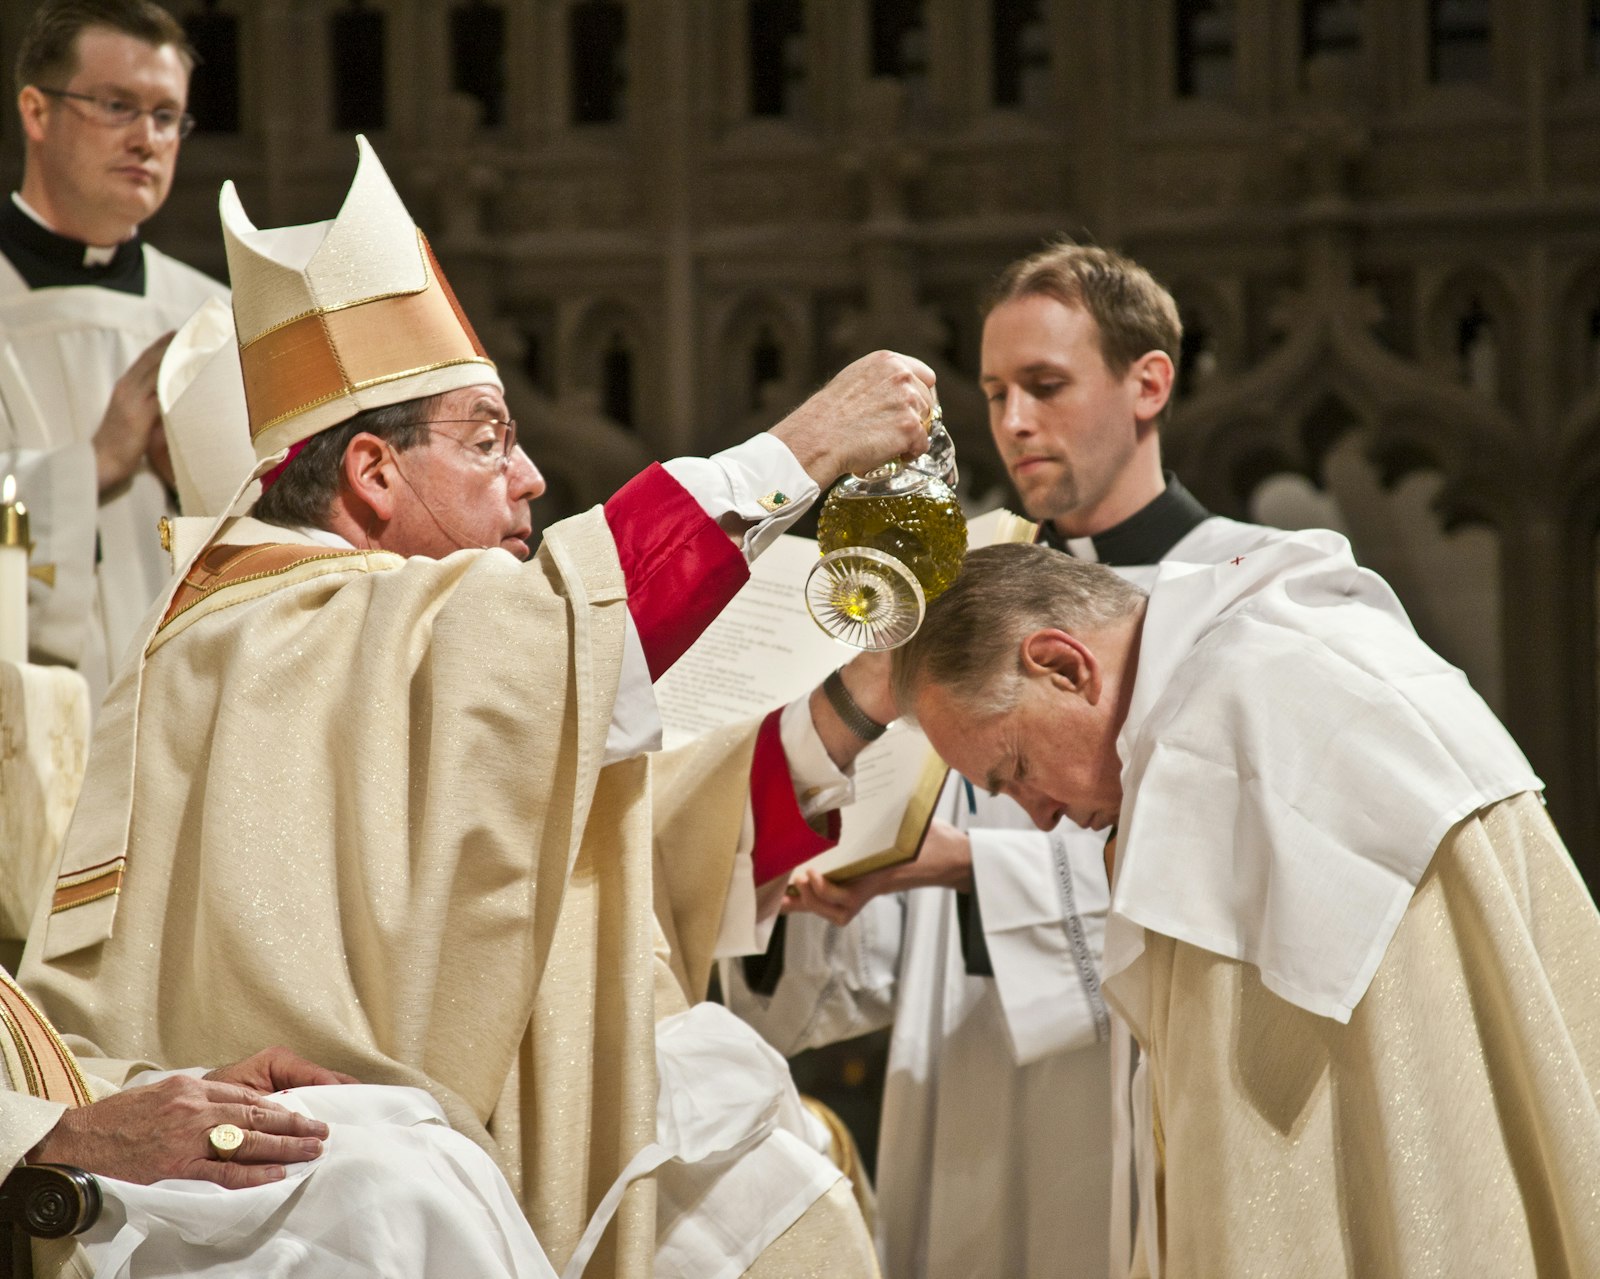 Archbishop Allen H. Vigneron pours Chrism oil over Bishop Hanchon's head during his episcopal ordination at the Cathedral of the Most Blessed Sacrament on May 5, 2011. (Larry A. Peplin | Detroit Catholic file photo)